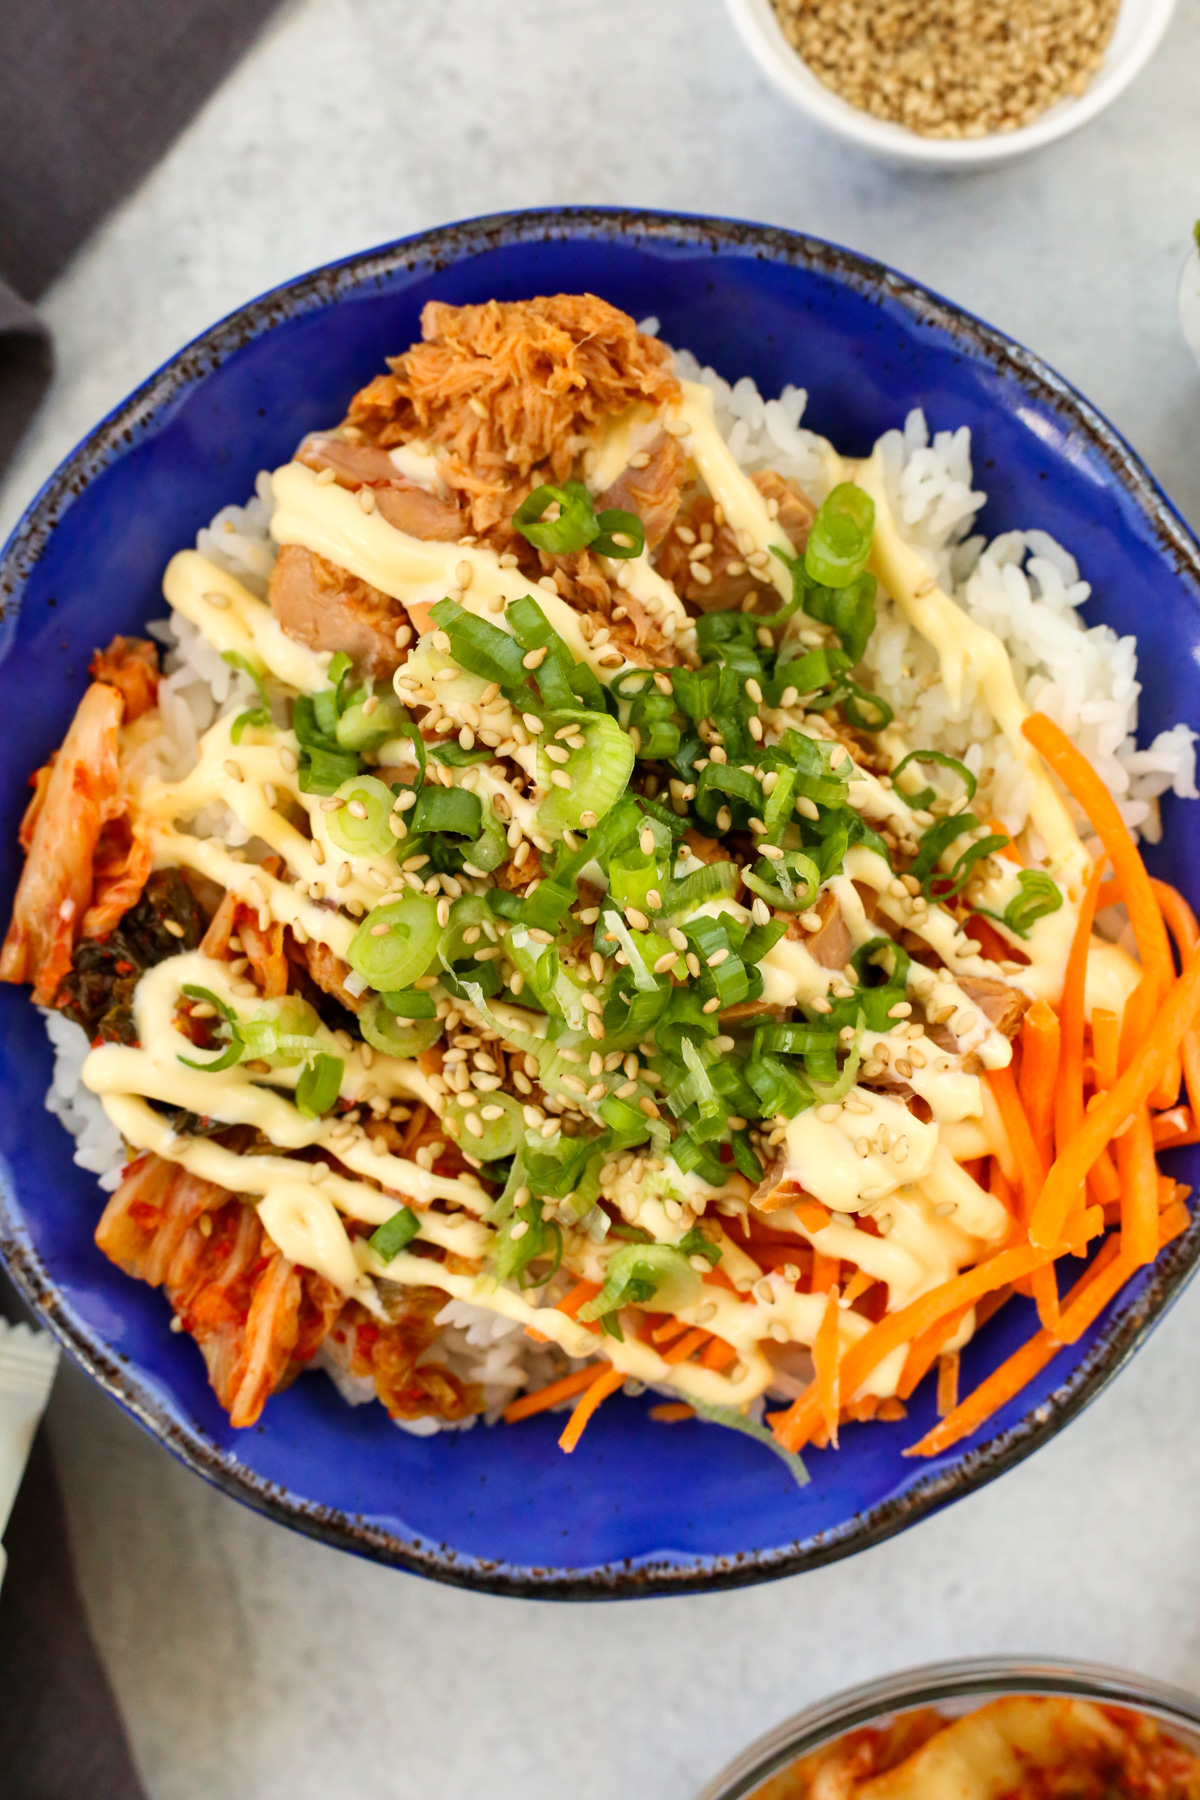 Closeup overhead view of a bowl of chamchi deopbap (Korean Tuna Rice Bowl) served in a bright blue glazed ceramic bowl, garnished heavily with kewpie mayo, sliced green onions, and toasted sesame seeds